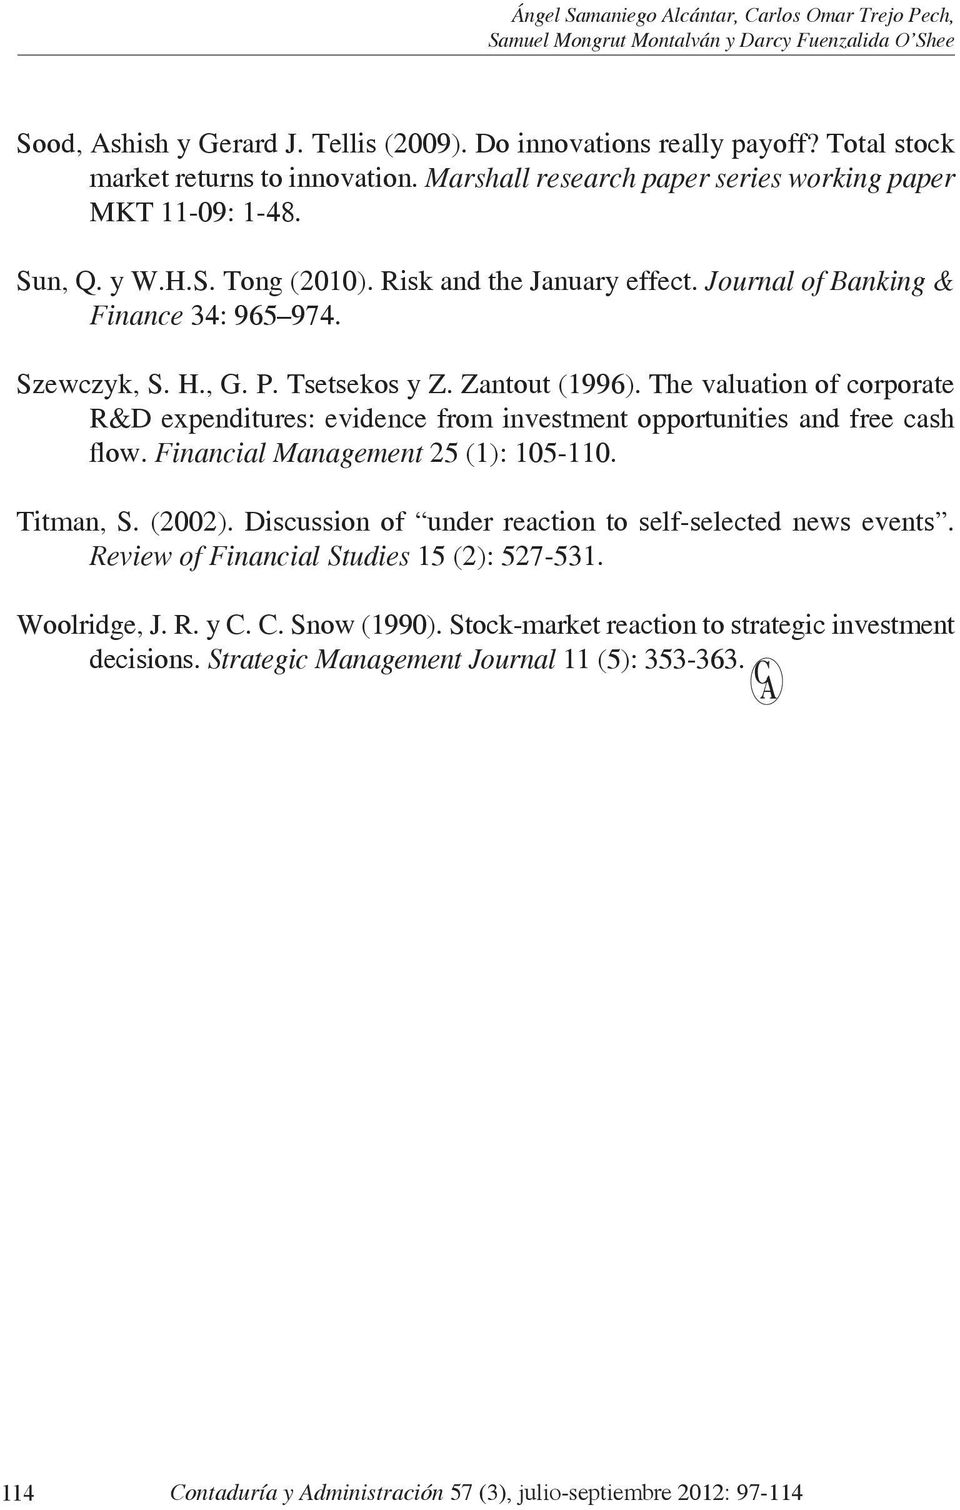 Journal of Banking & Finance 34: 965 974. Szewczyk, S. H., G. P. Tsetsekos y Z. Zantout (1996). The valuation of corporate R&D expenditures: evidence from investment opportunities and free cash flow.